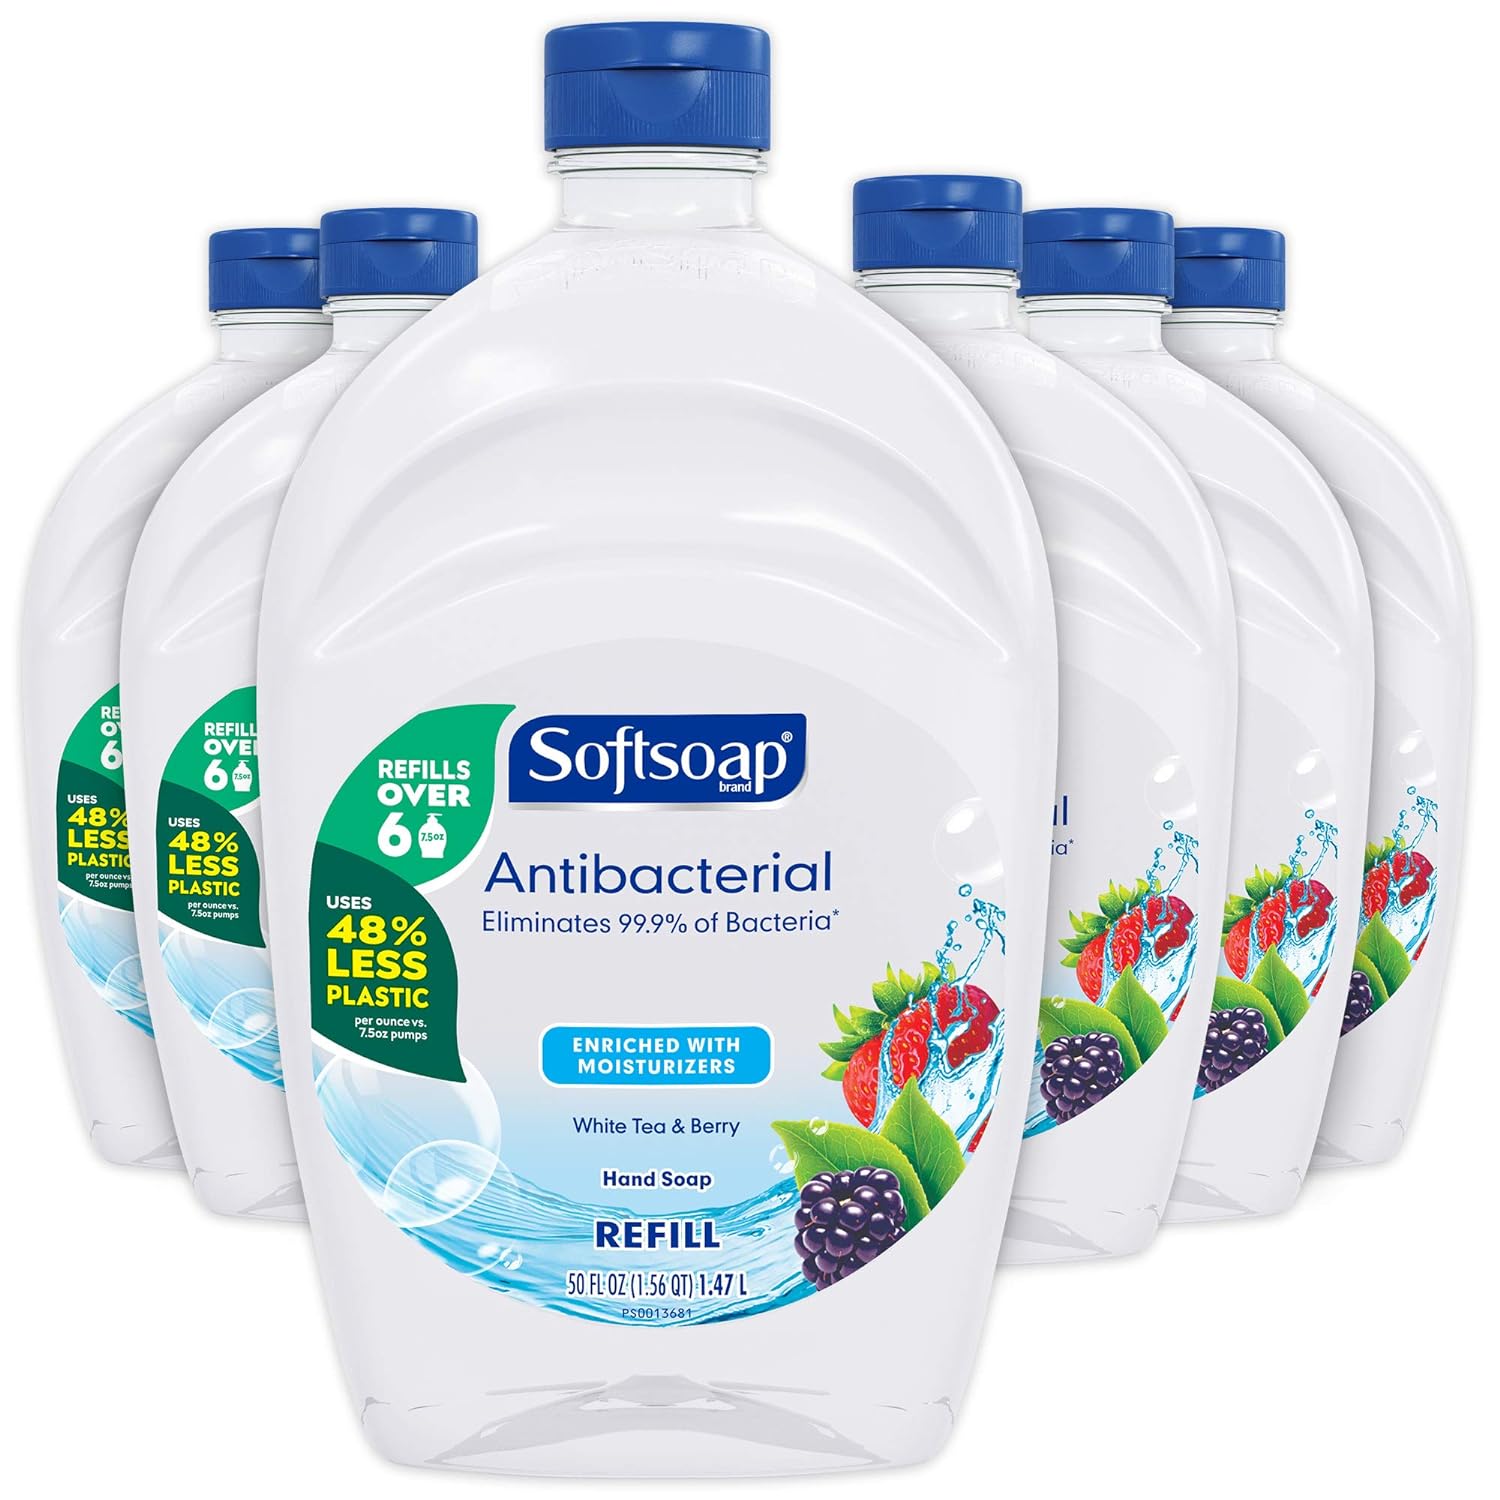 Softsoap - US05259A SOFTSOAP Antibacterial Liquid Hand Soap Refill, White Tea and Berry Fusion, 50 Ounce Bottle, Pack of 6